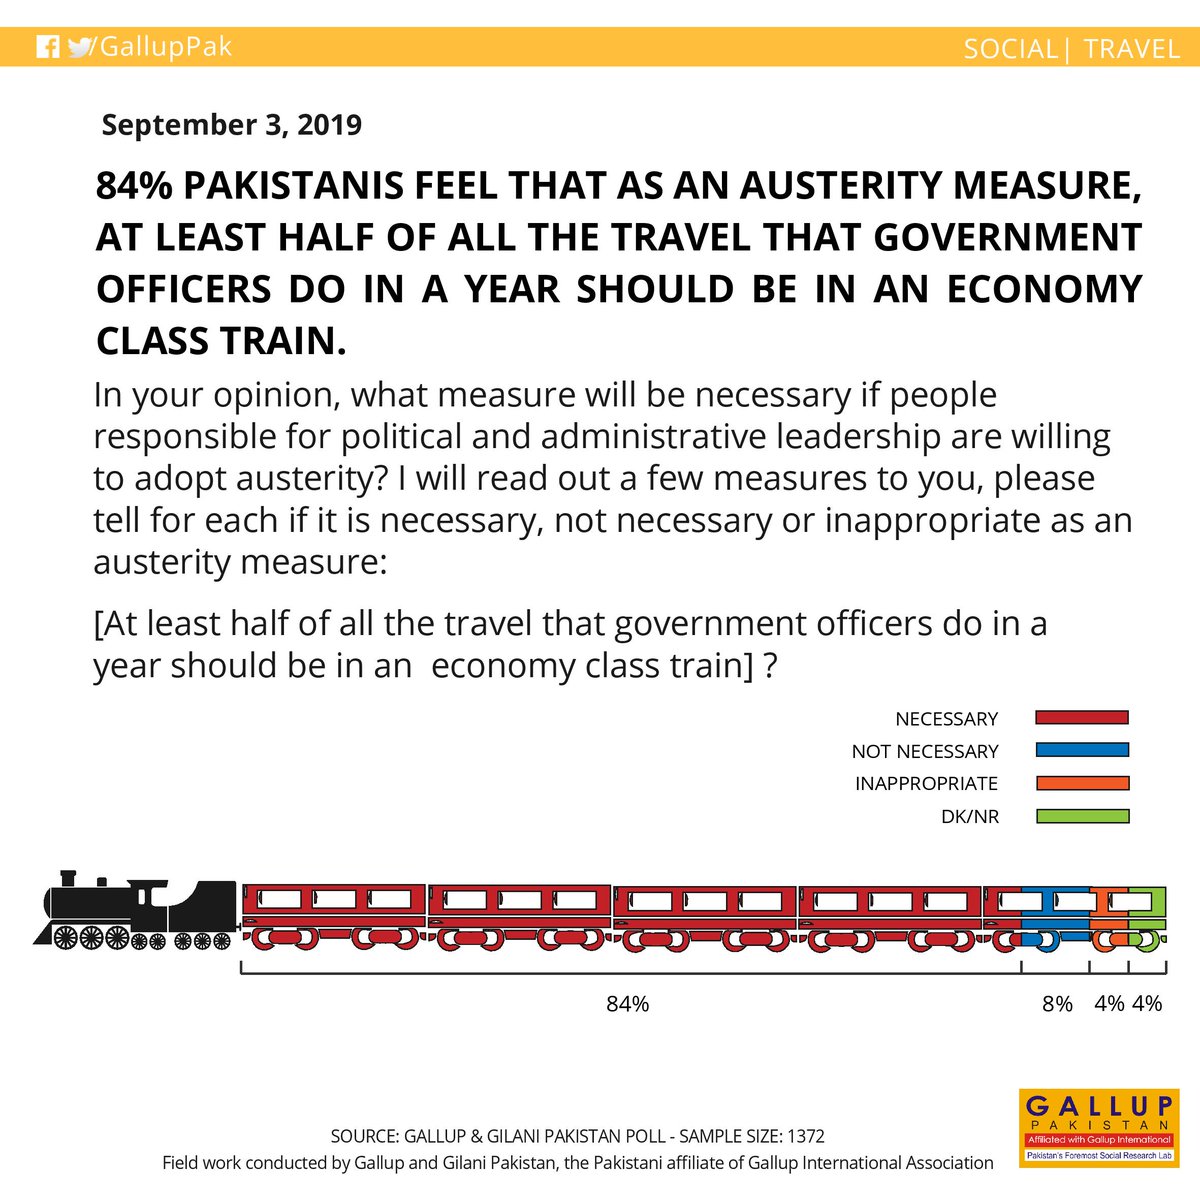 Gallup Pakistan 84 Pakistanis Feel That As An Austerity Measure At Least Half Of All The Travel That Government Officers Do In A Year Should Be In An Economy Class